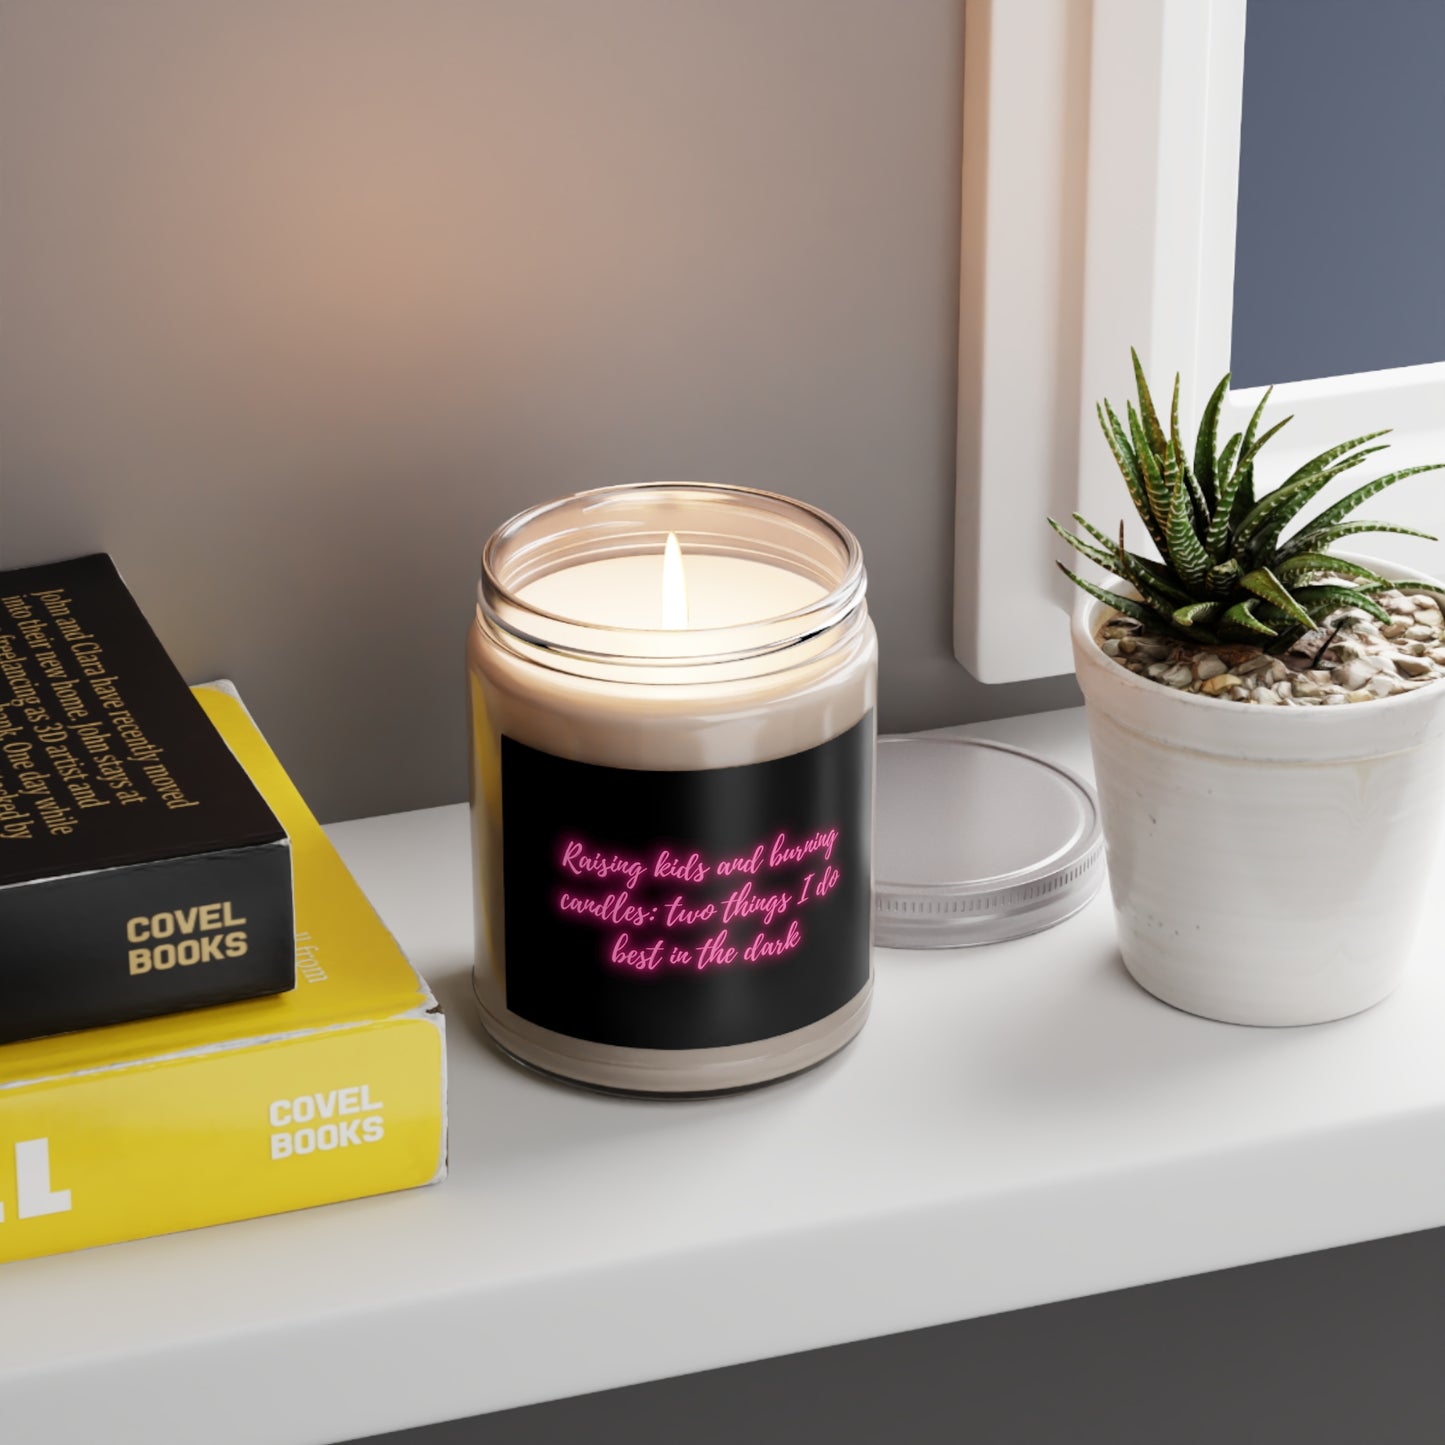 Raising kids and burning candles: two things I do best in the dark Scented Candles, 9oz